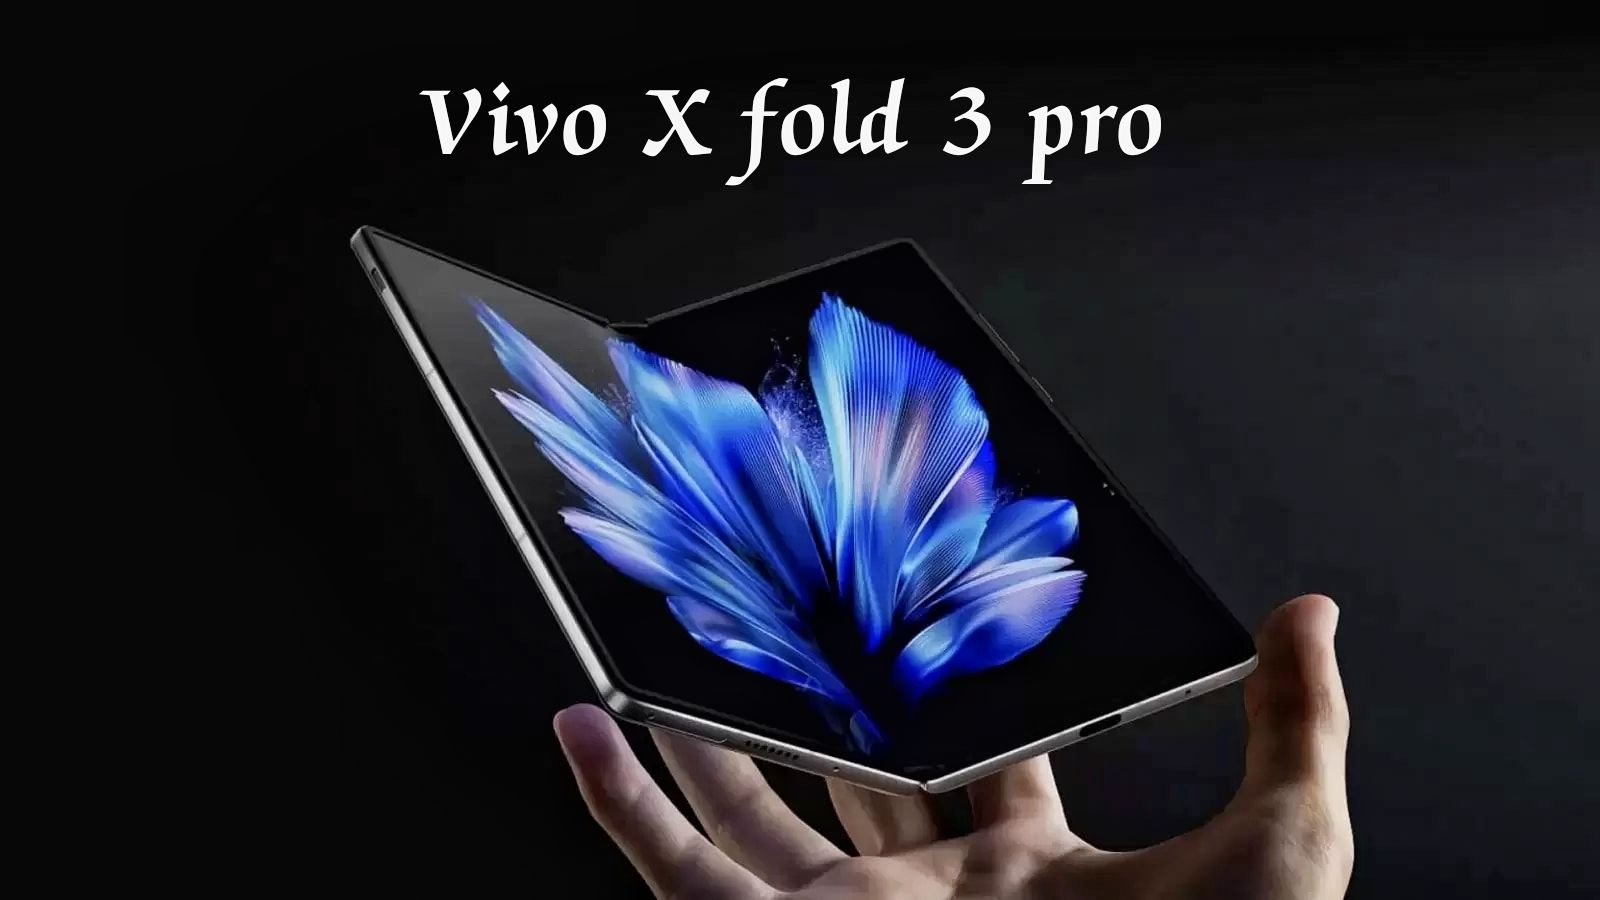 Vivo X fold 3 pro price in India and specification